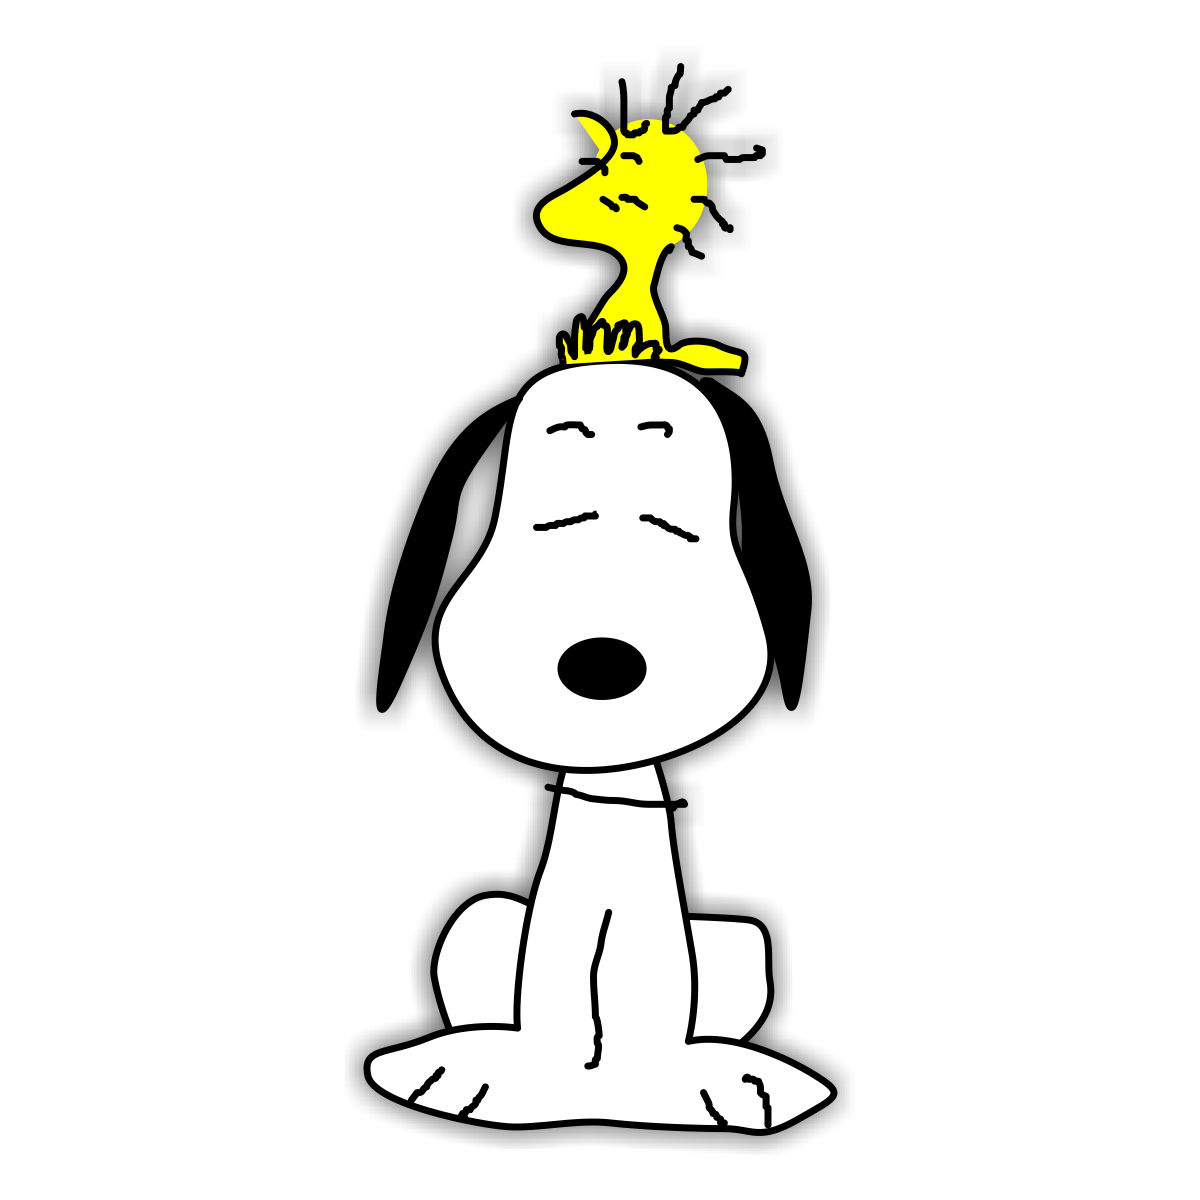 44+] Free Snoopy Wallpaper for iPad on